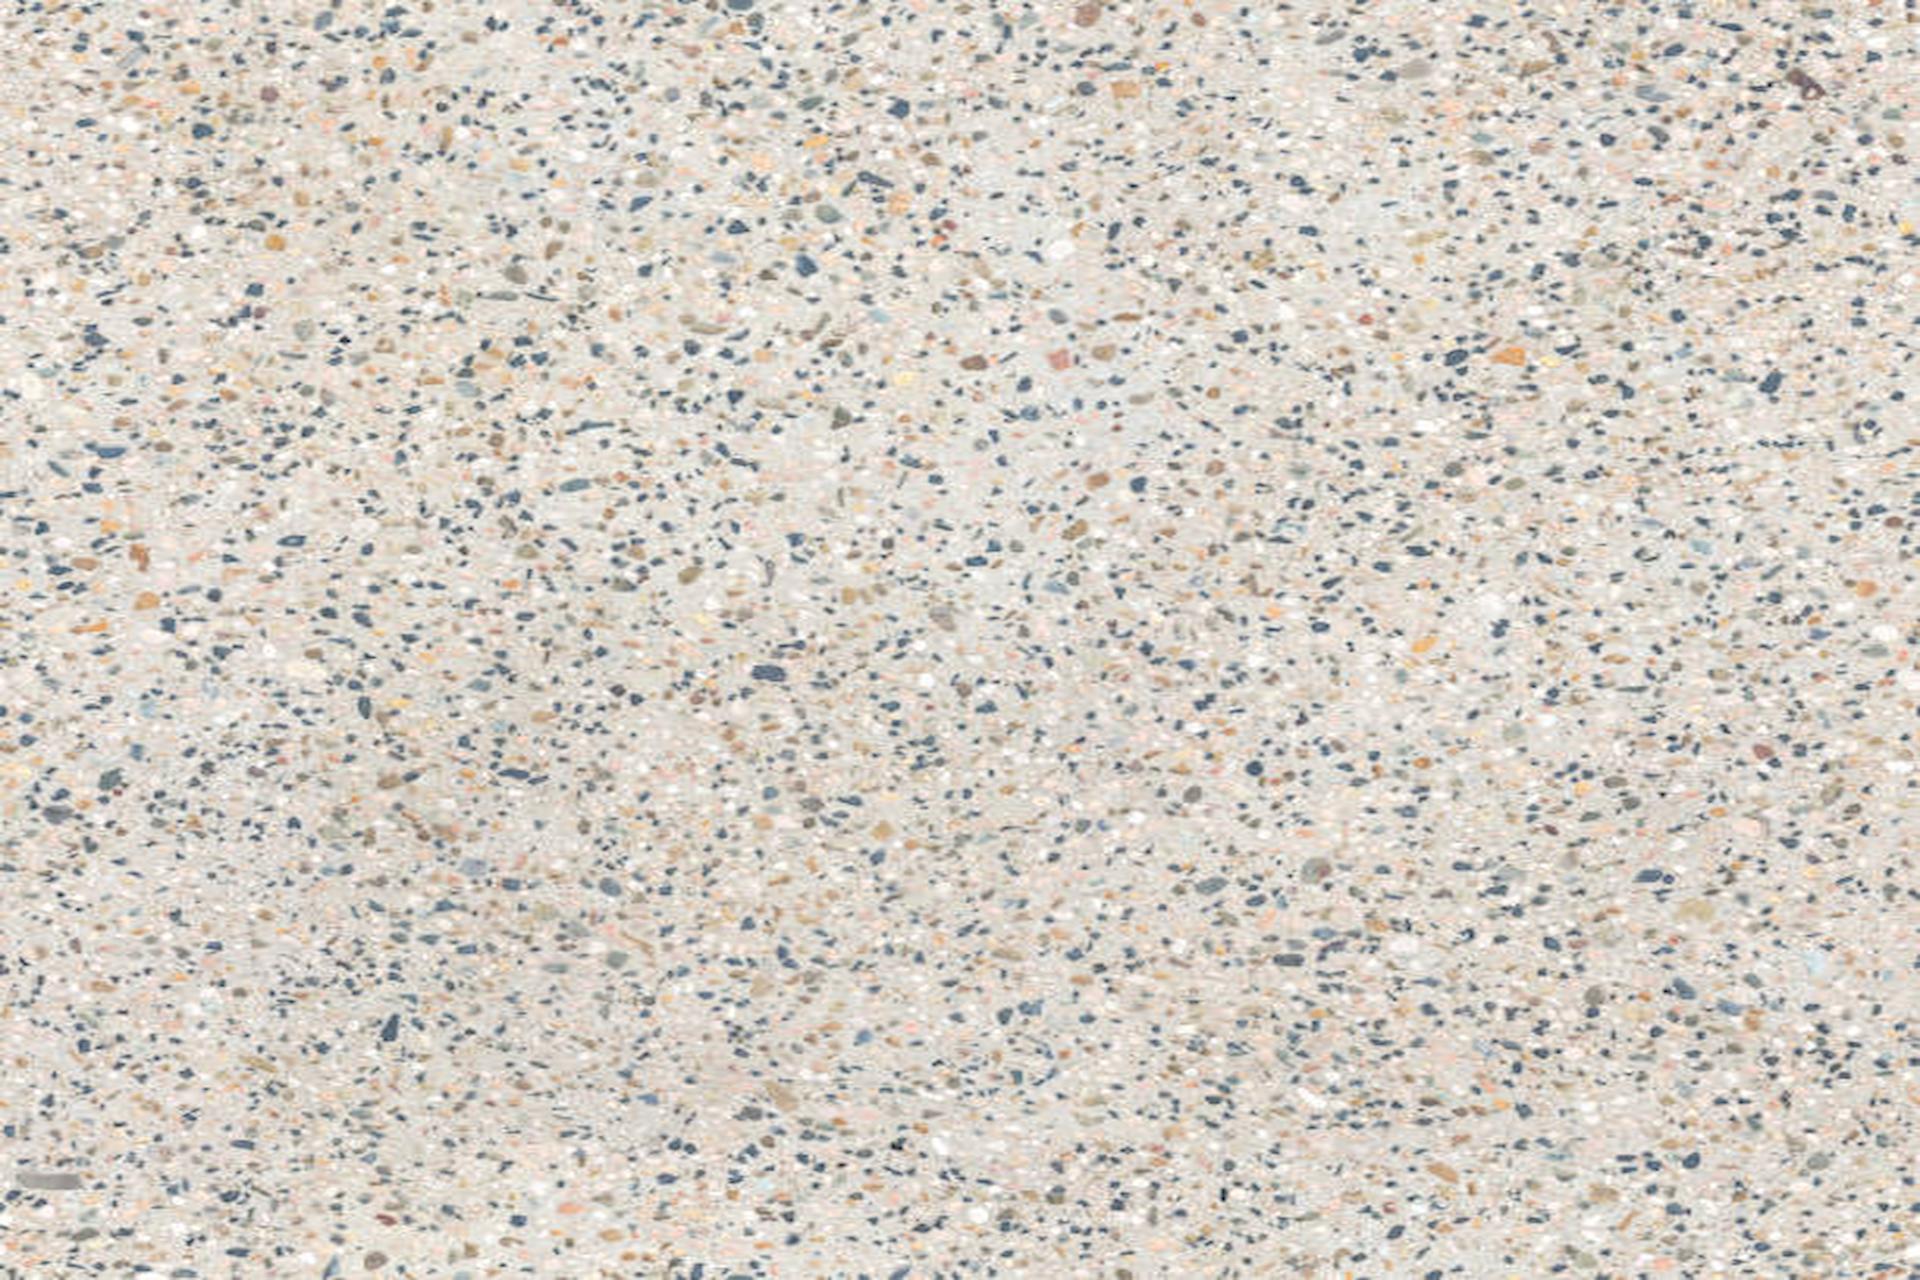 Some Great Advantages Of Using Exposed Aggregate Concrete